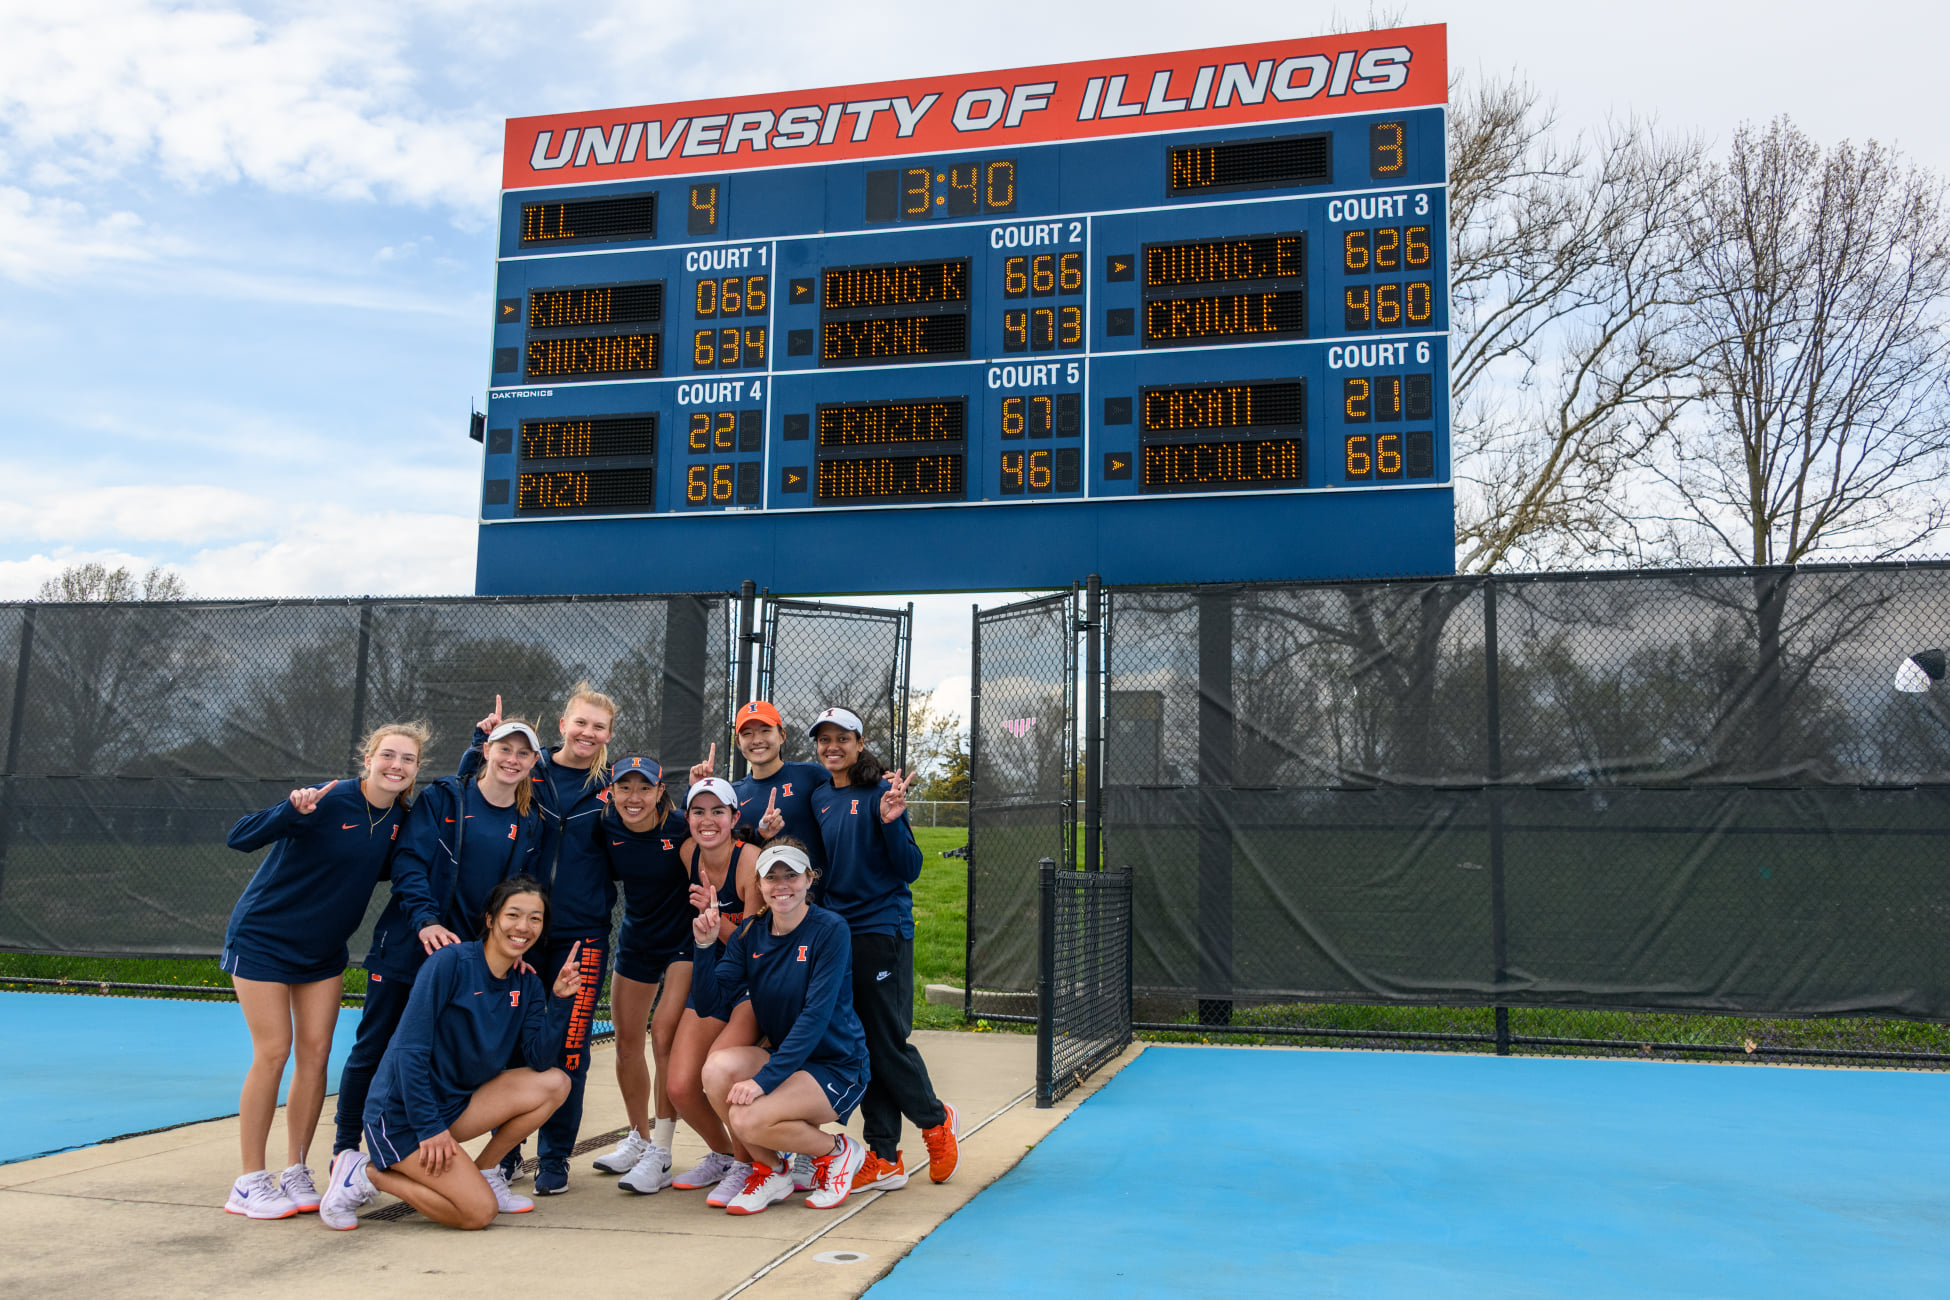 Group of nine women huddled together and smile at the camera. They are all holding up one finger to indicate #1 status. They are standing on a tennis court, with a scoreboard indicating their win behind them. Photo from the Fighting Illini Womenâ€™s Tennis Facebook page.